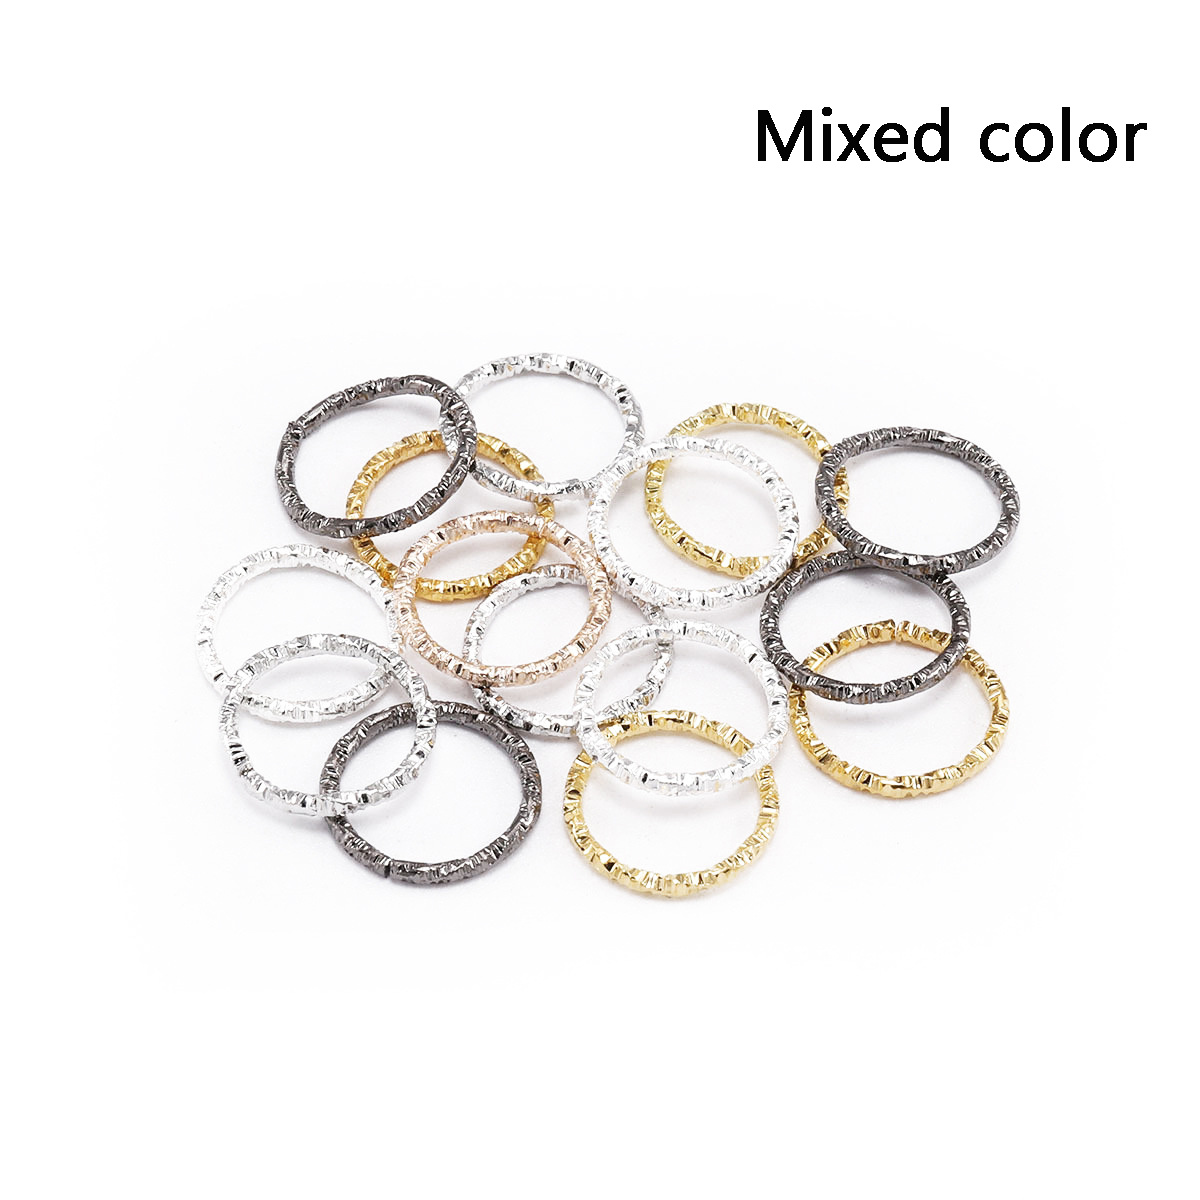 CRAFTMEMORE Open Jump Rings, Split Rings Connectors for DIY Jewelry Finding Making Craft Accessories (6.4 mm x 100pcs, Antique Brass)